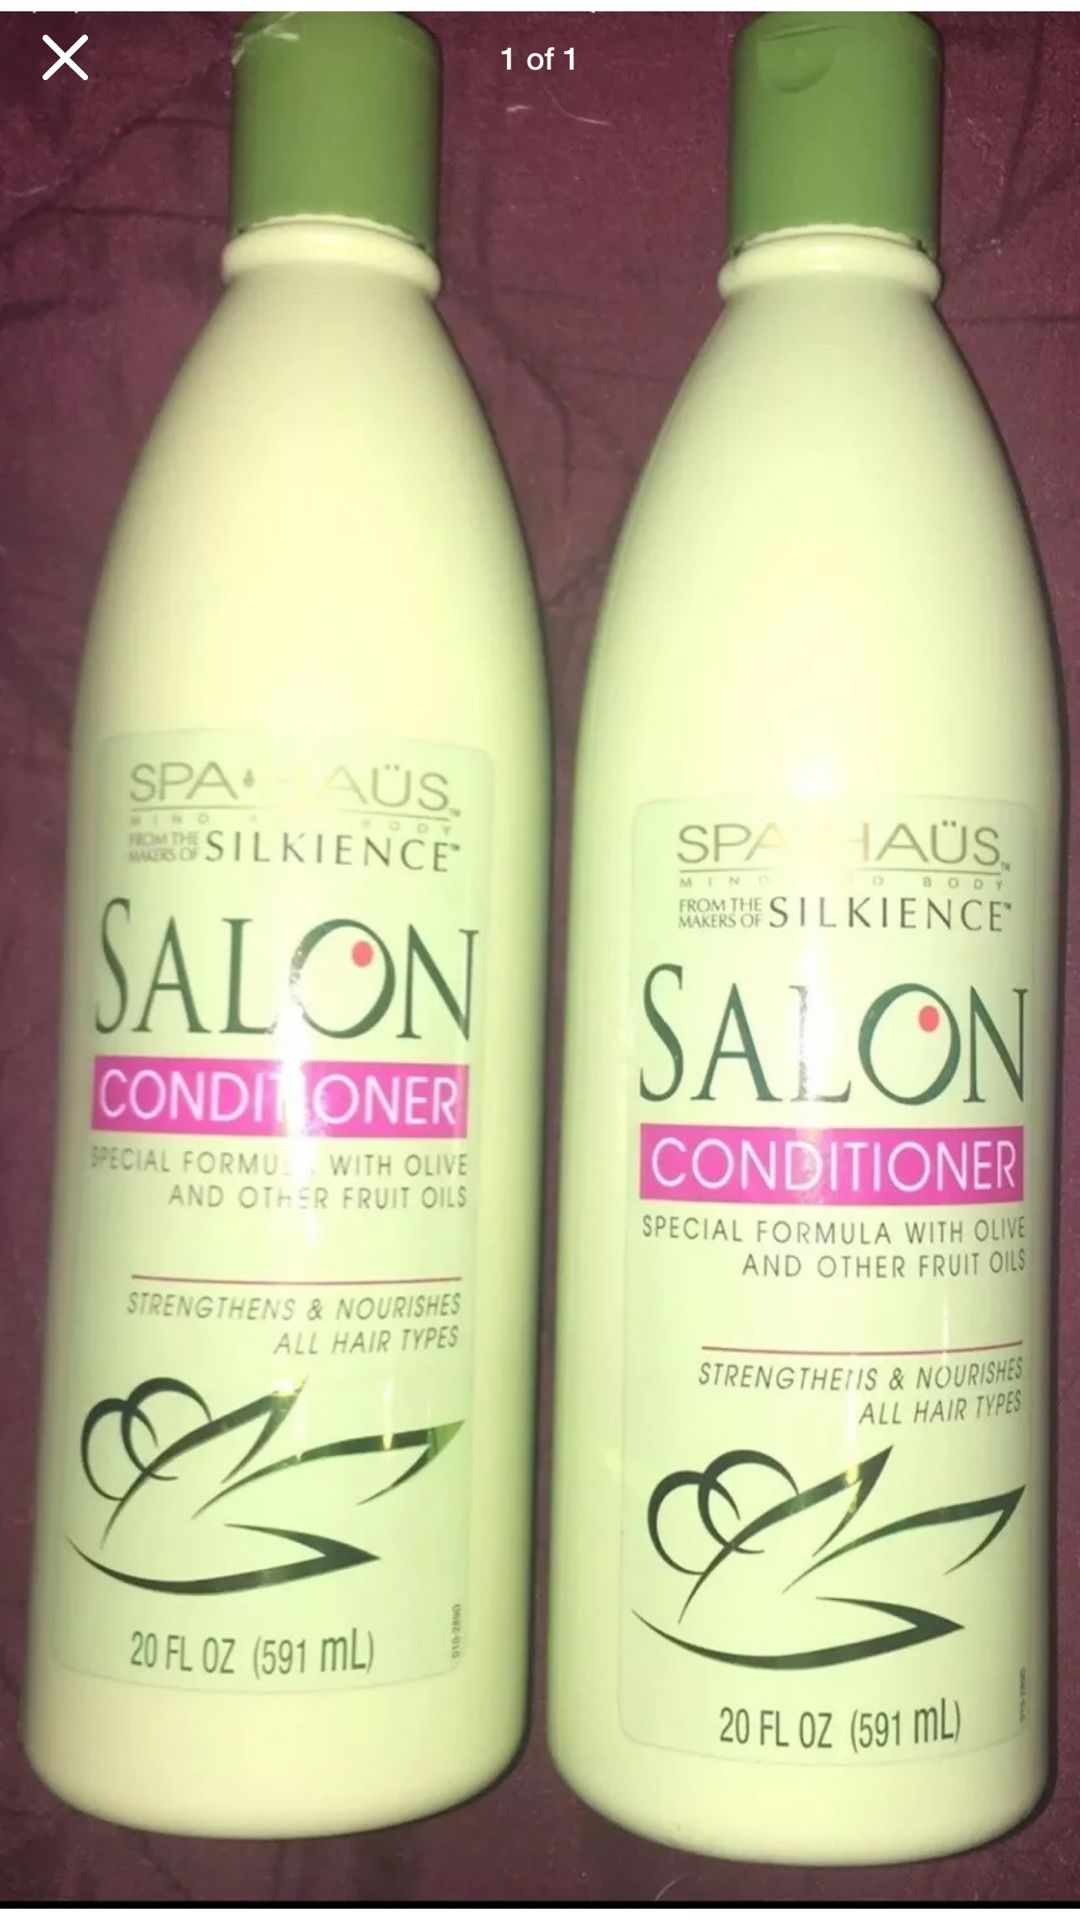 Lot Of 2 Spa Haus Salon Conditioner w/ Olive and Fruit Oils 20 oz Each